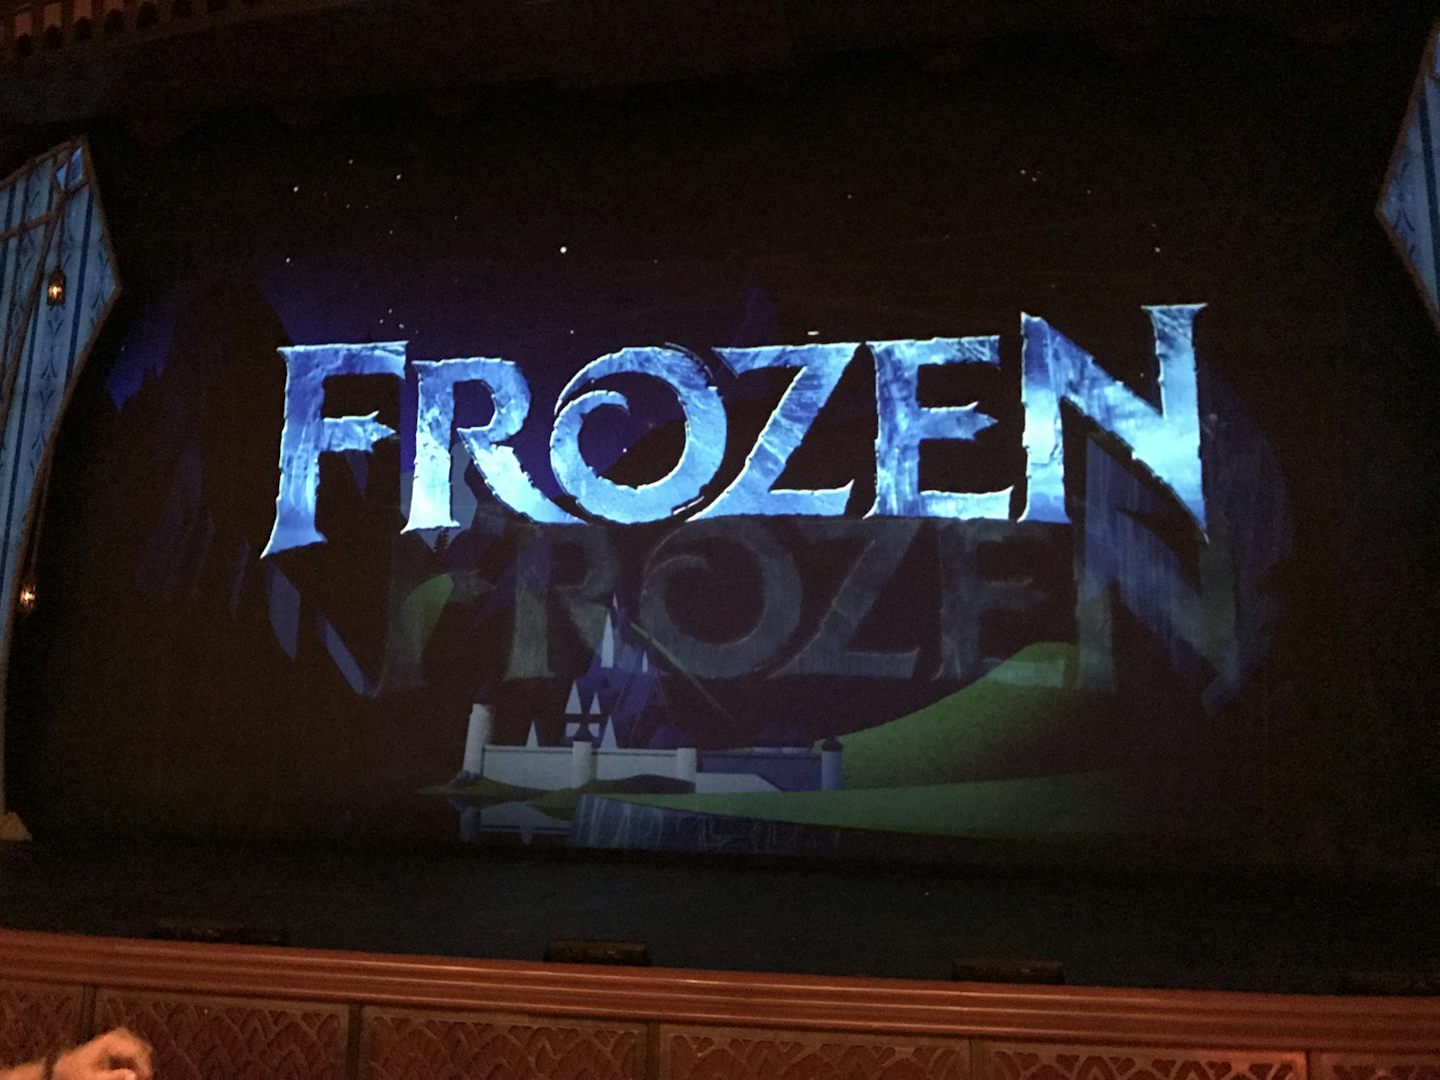 Like Action - Frozen Show